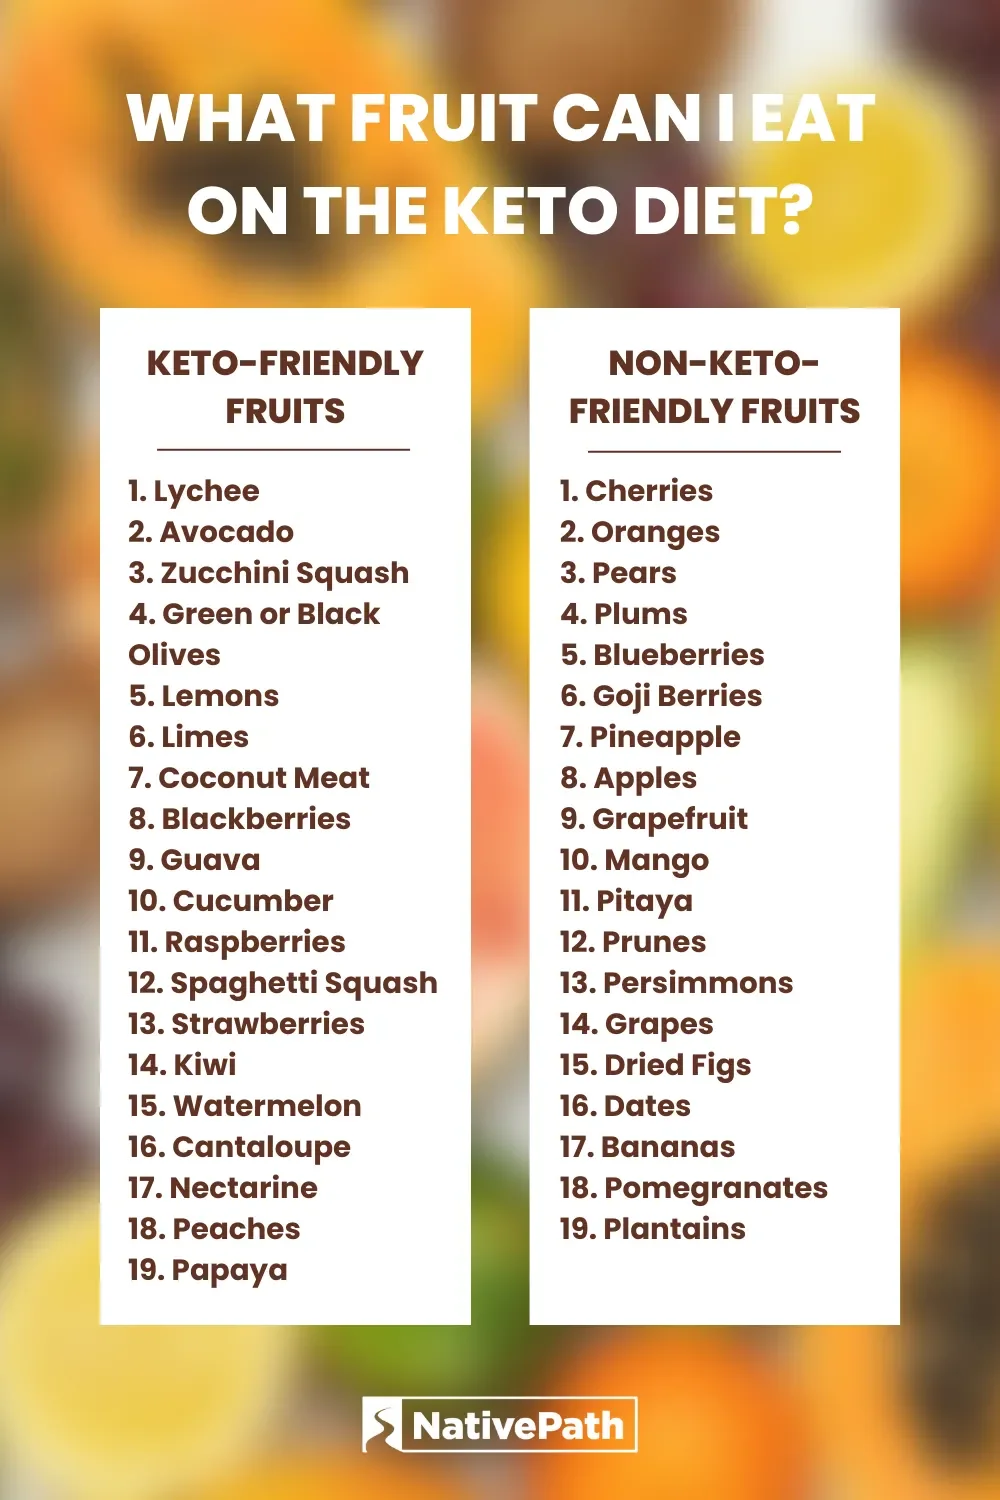 Infographic showing keto-friendly fruit and non-keto-friendly fruit.